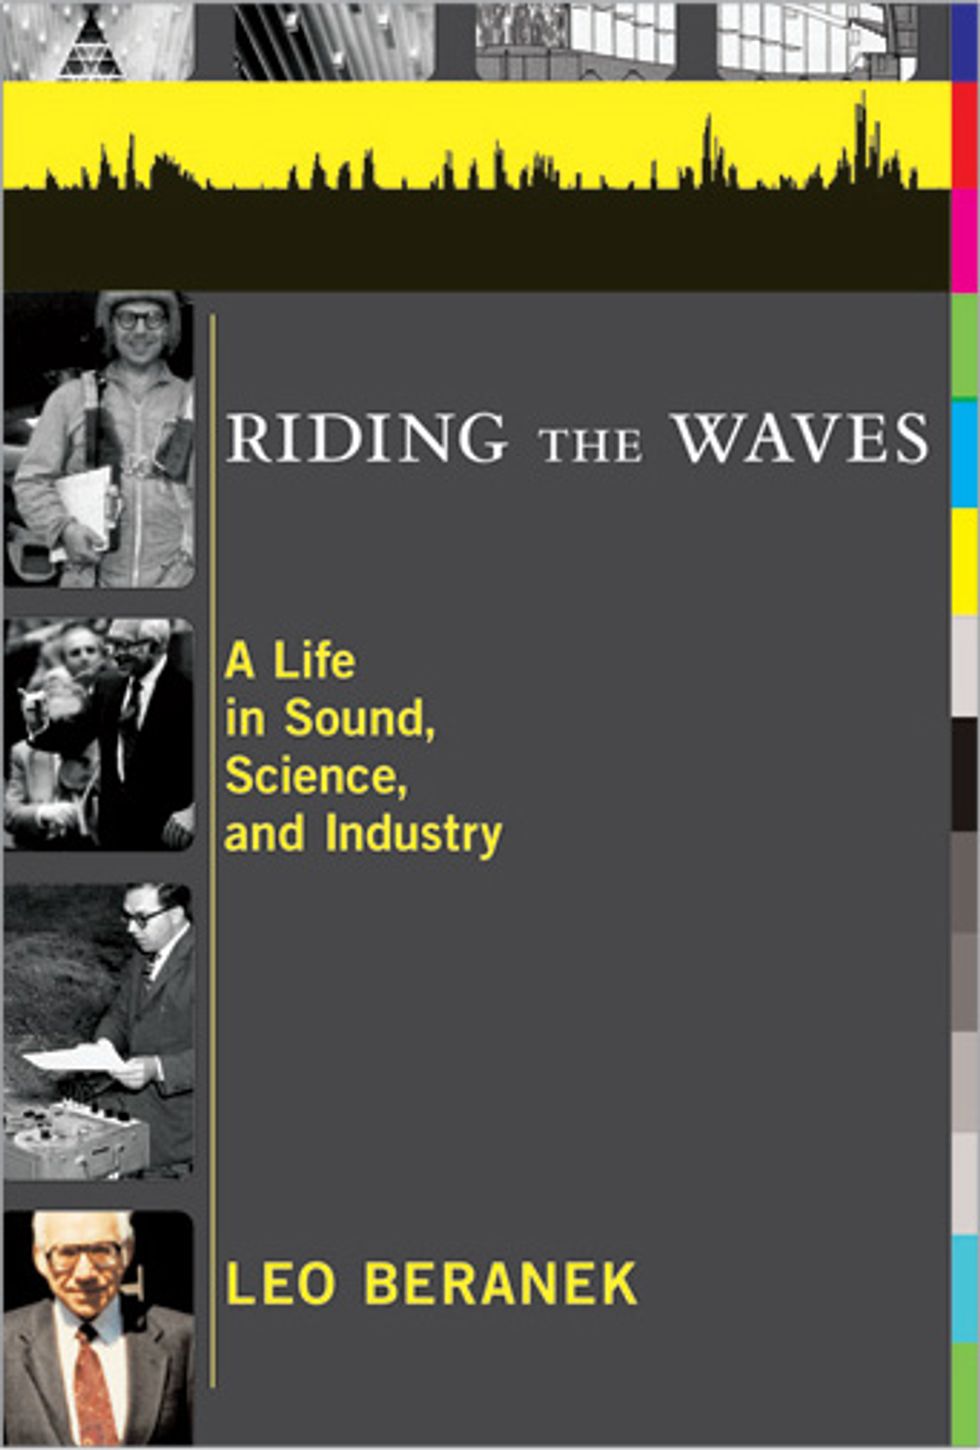 Cover of the book 'Riding The Waves: A Life in Sound, Science, and Industry'